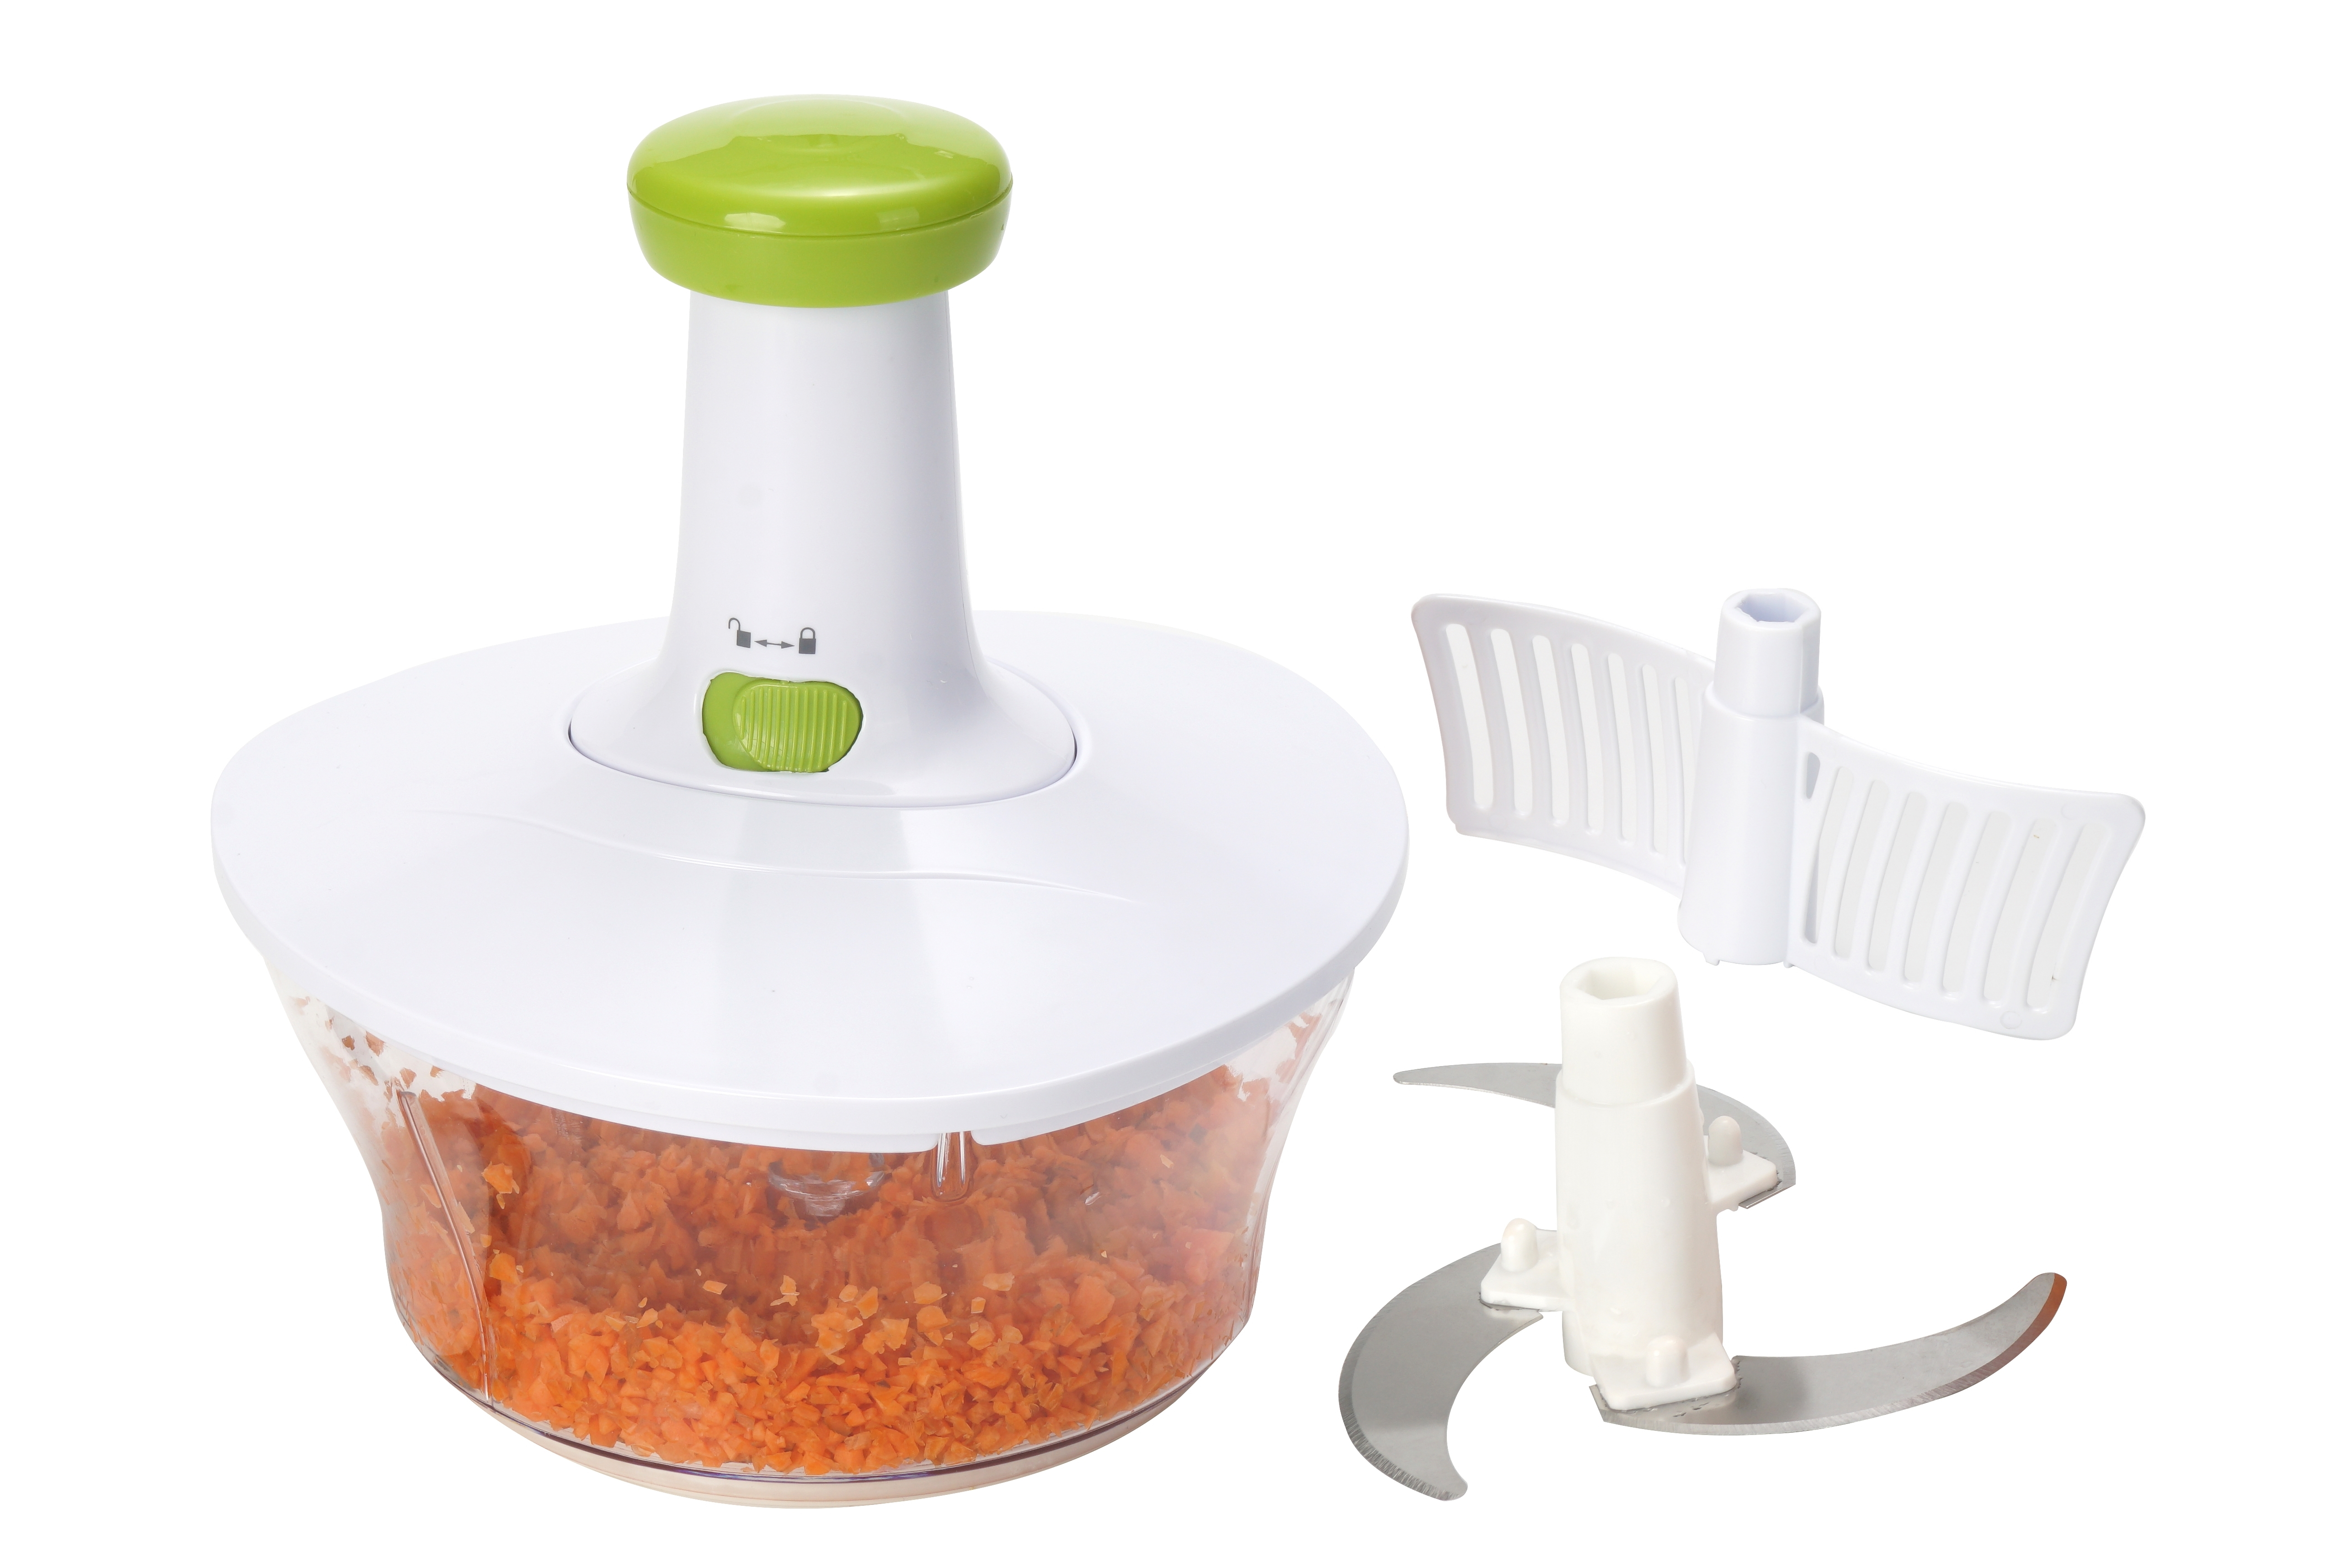 Brieftons Salad Spinner and Chopper - A How-To Guide